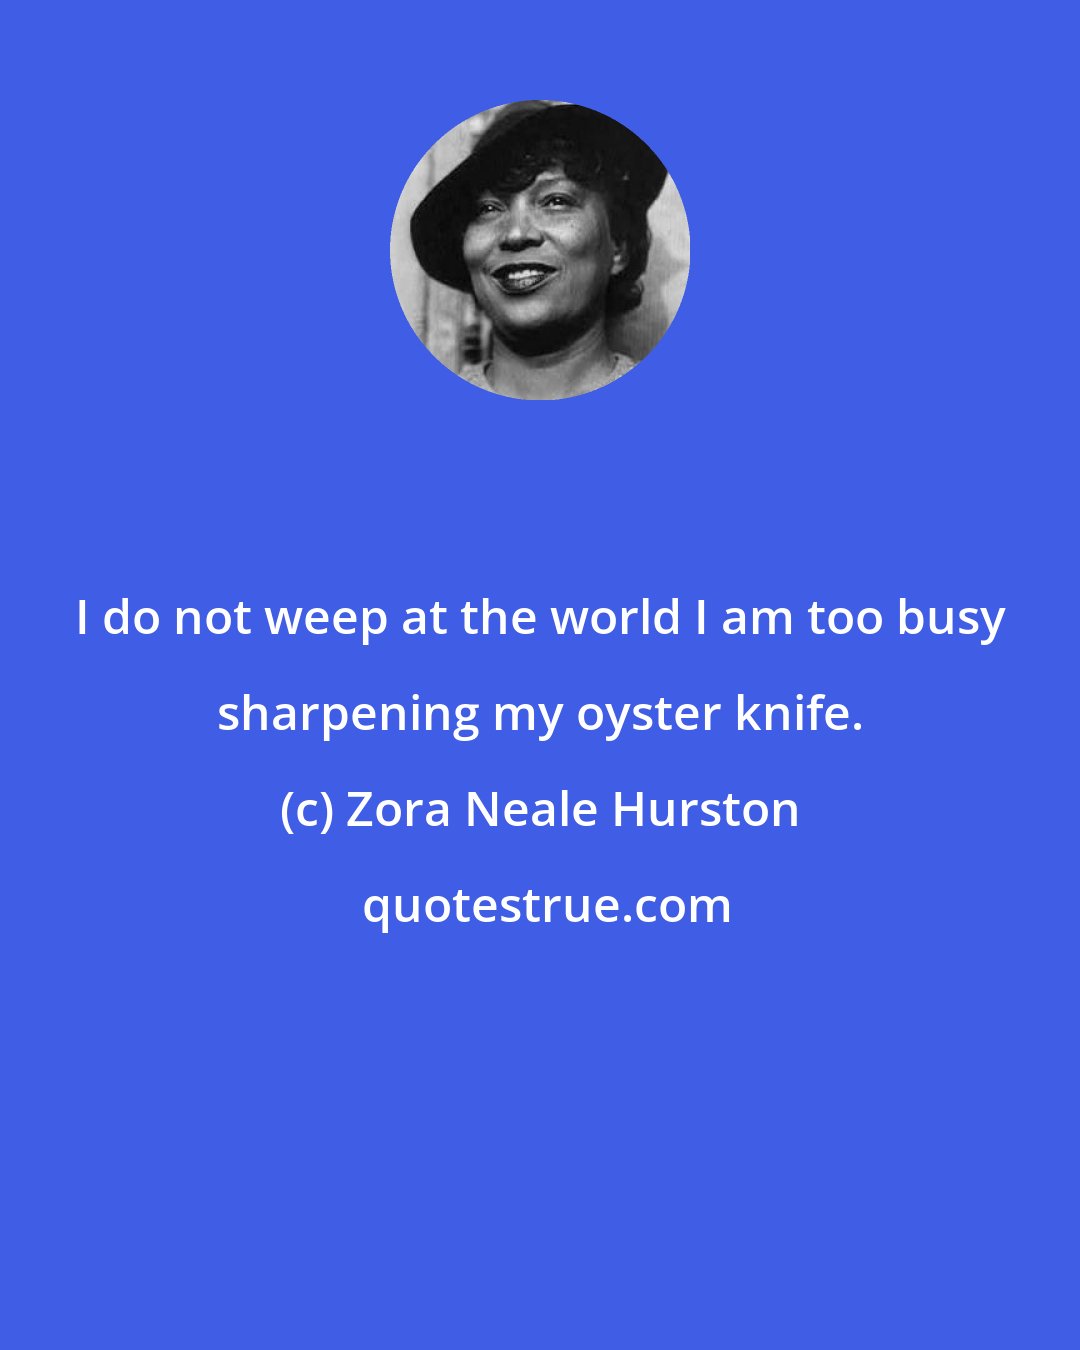 Zora Neale Hurston: I do not weep at the world I am too busy sharpening my oyster knife.